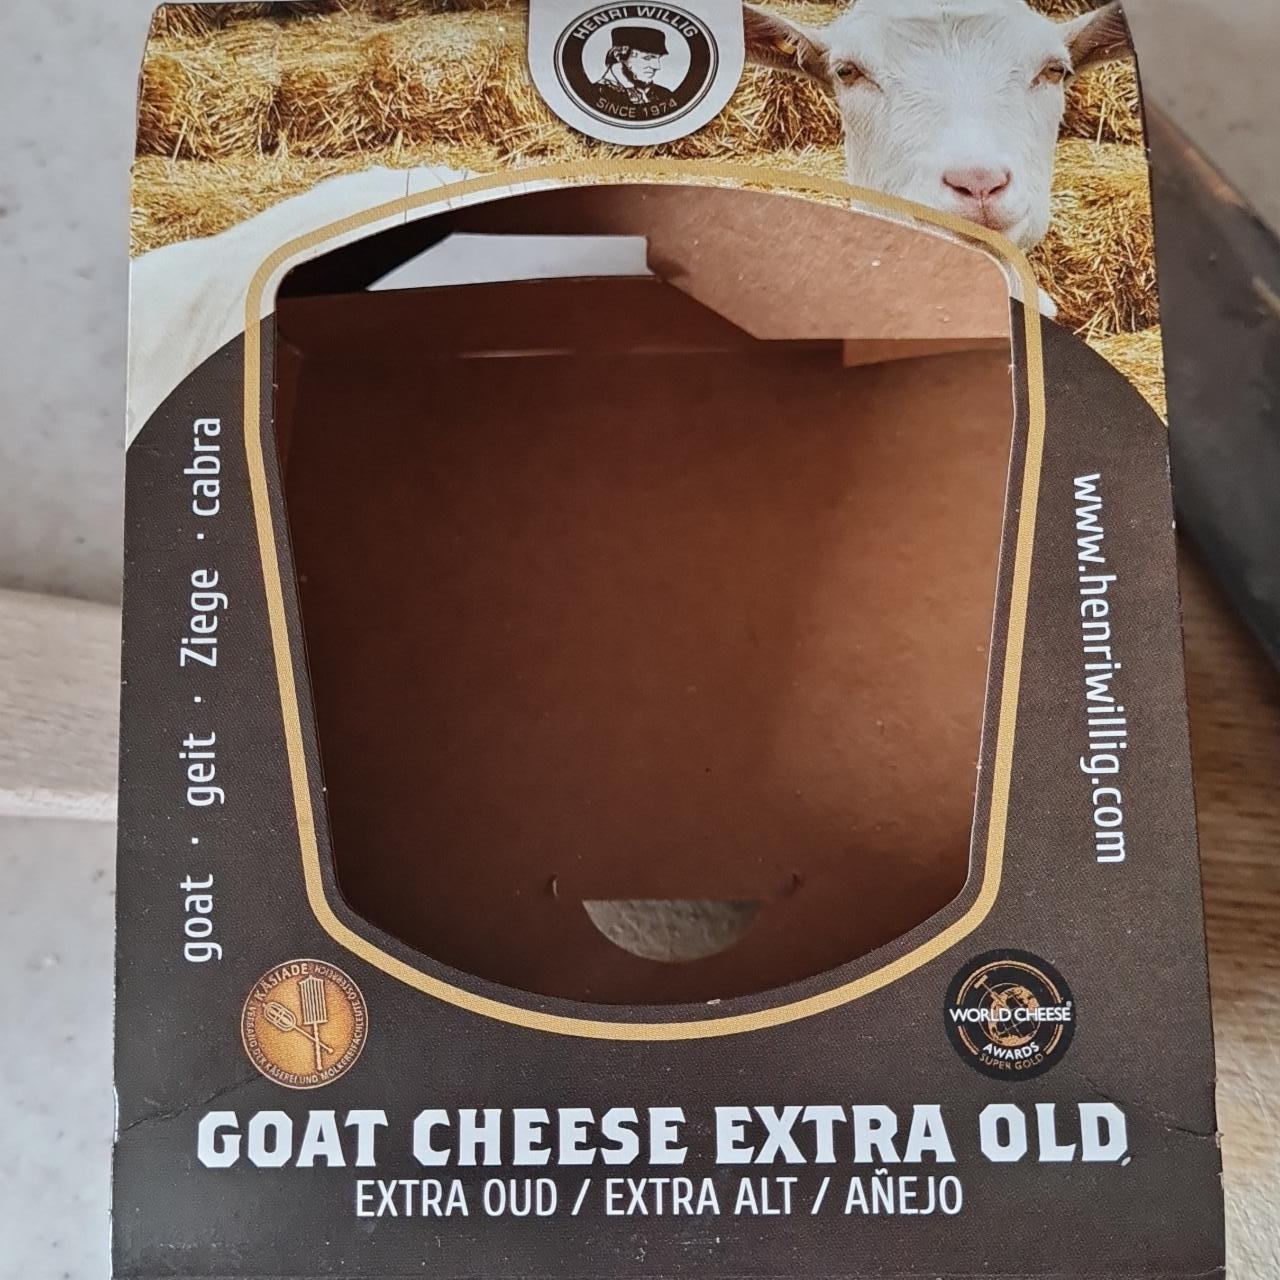 Fotografie - Goat cheese extra old Henri Willig